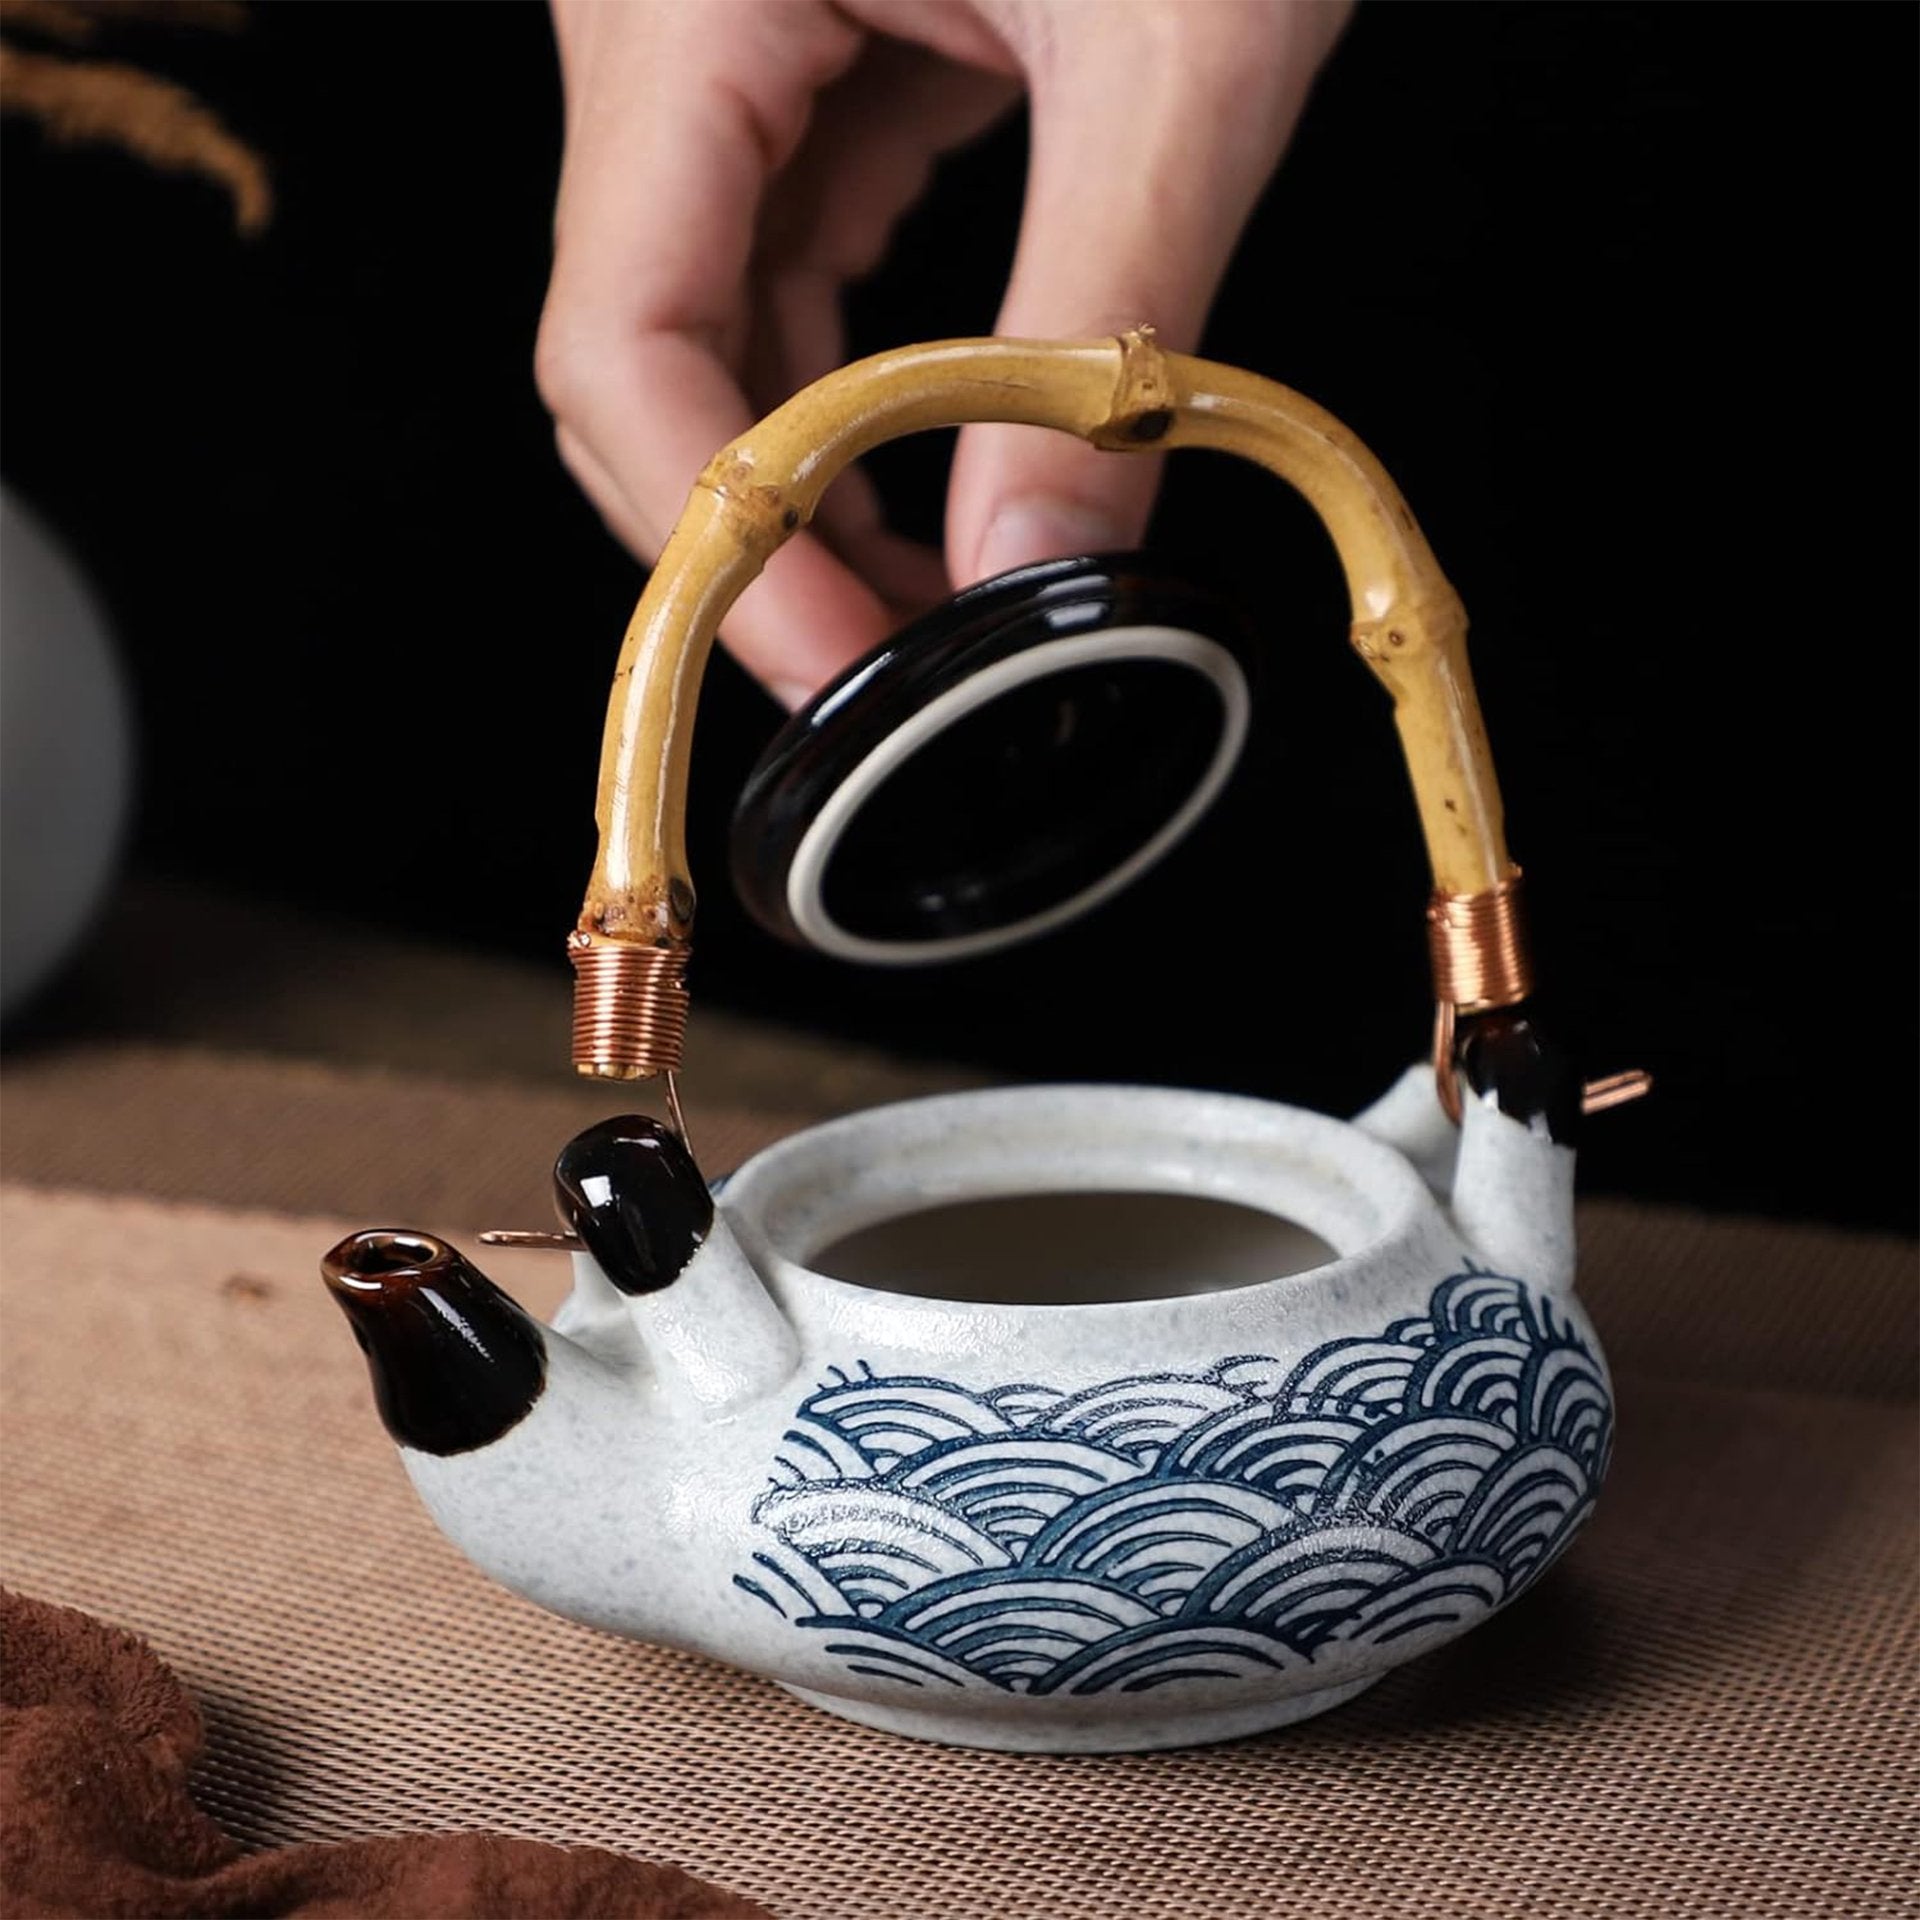 A hand lifting the lid off a patterned teapot with a bamboo handle.